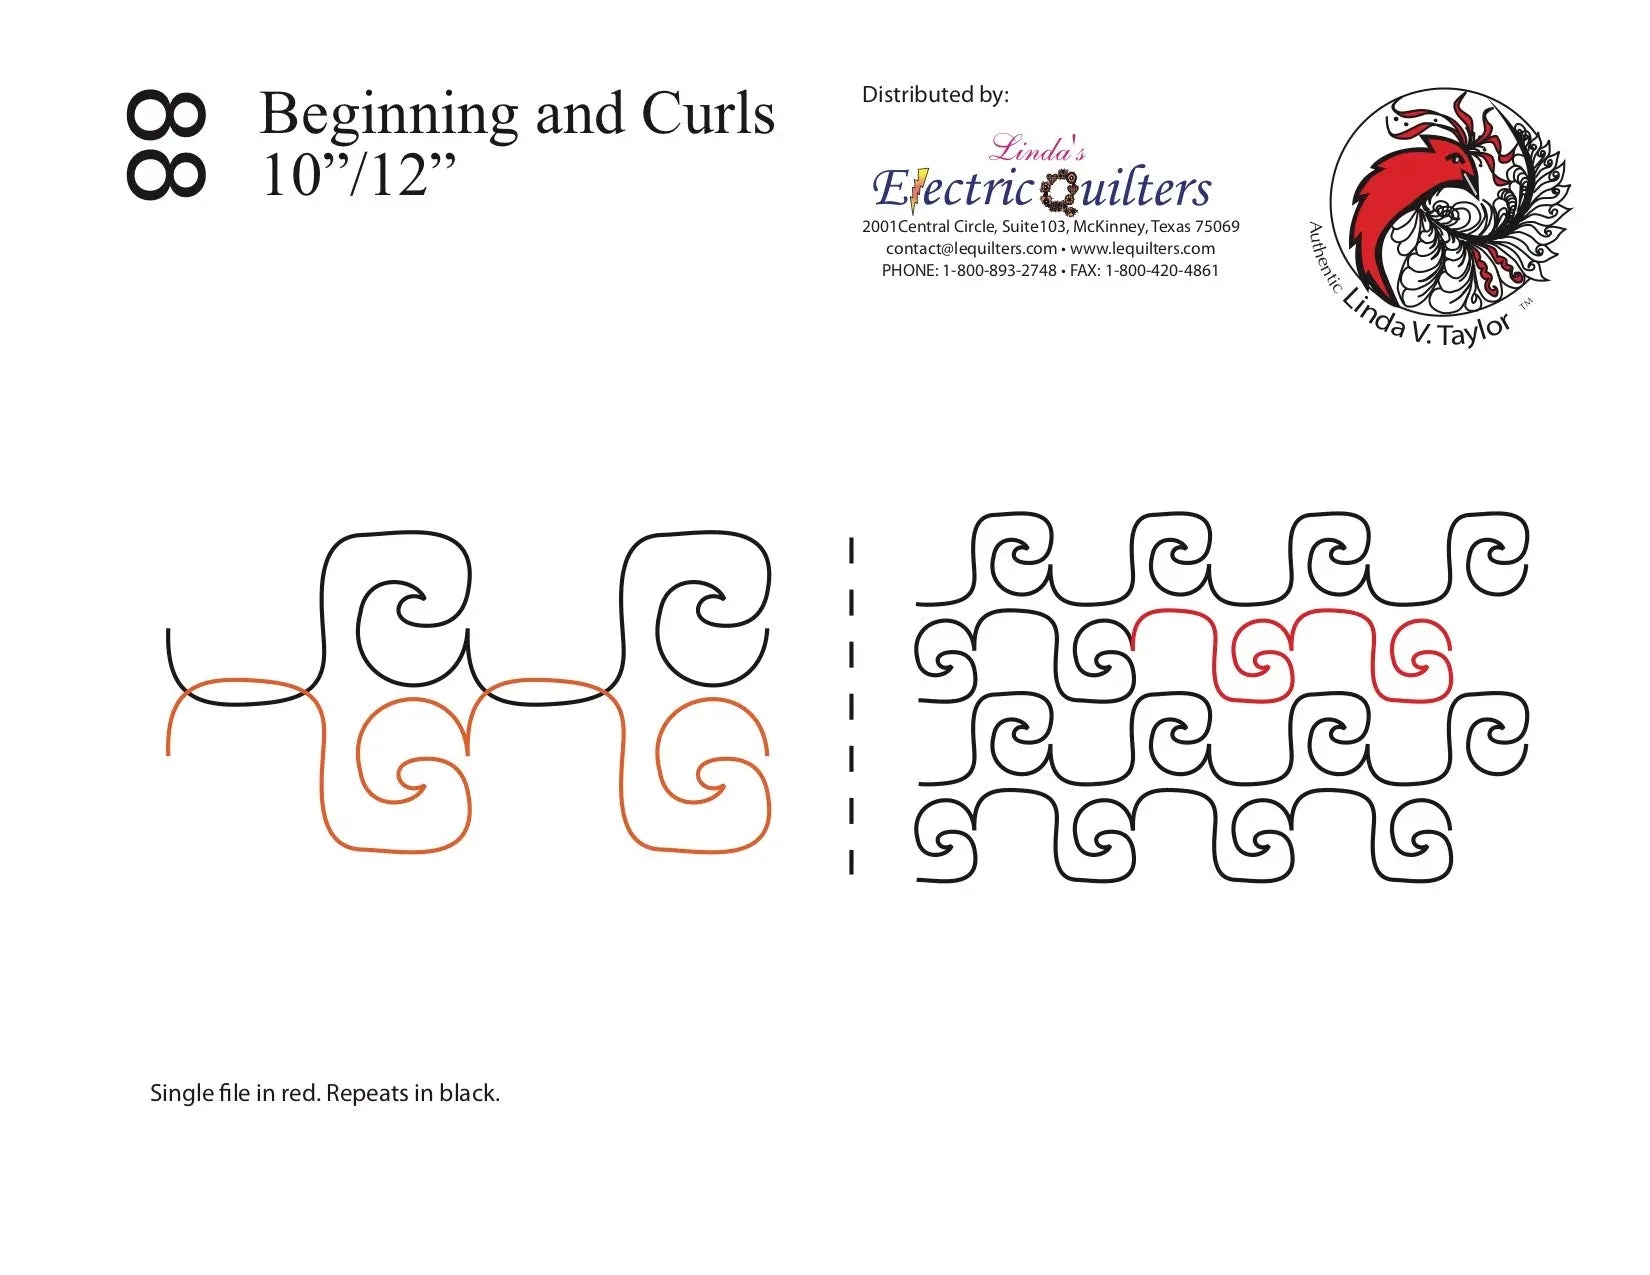 088 Beginning And Curls Pantograph by Linda V. Taylor - Linda's Electric Quilters